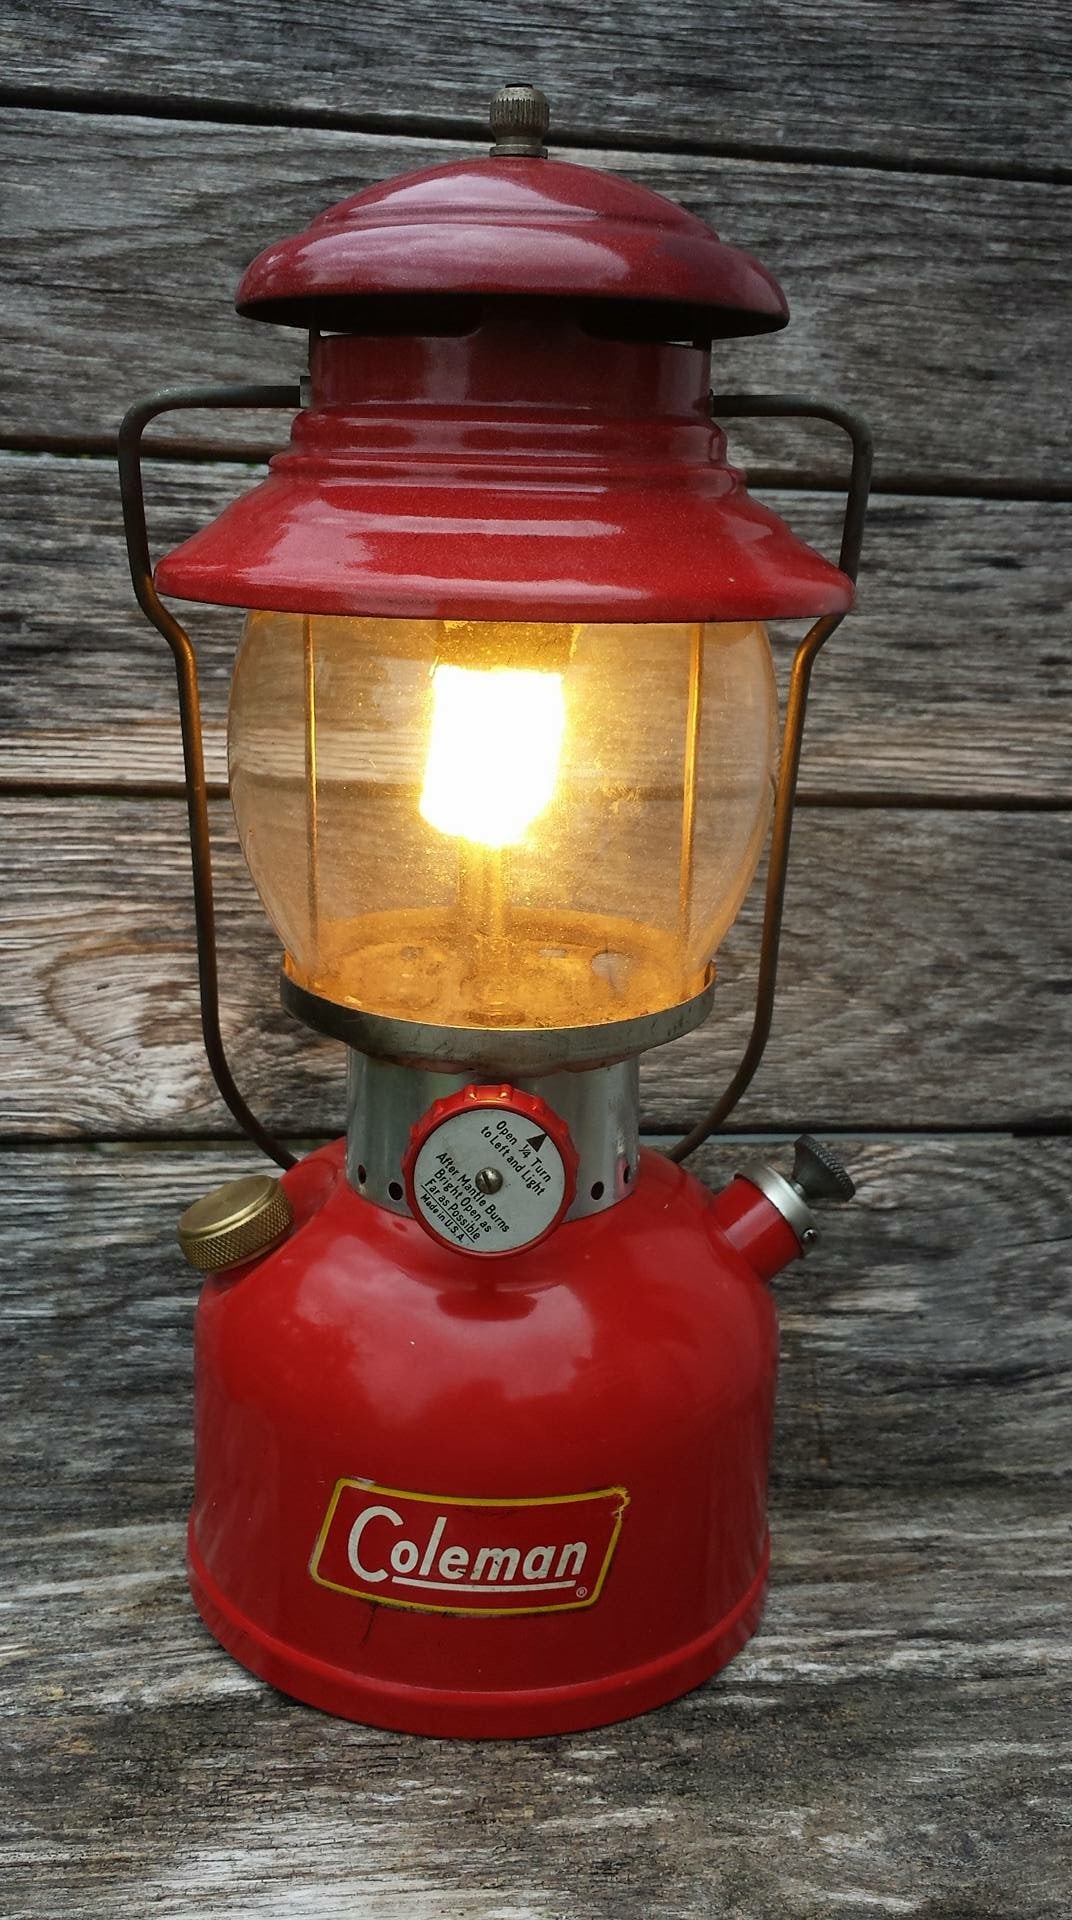 My little red Coleman lantern bought at the local thrift store by Cuyuna